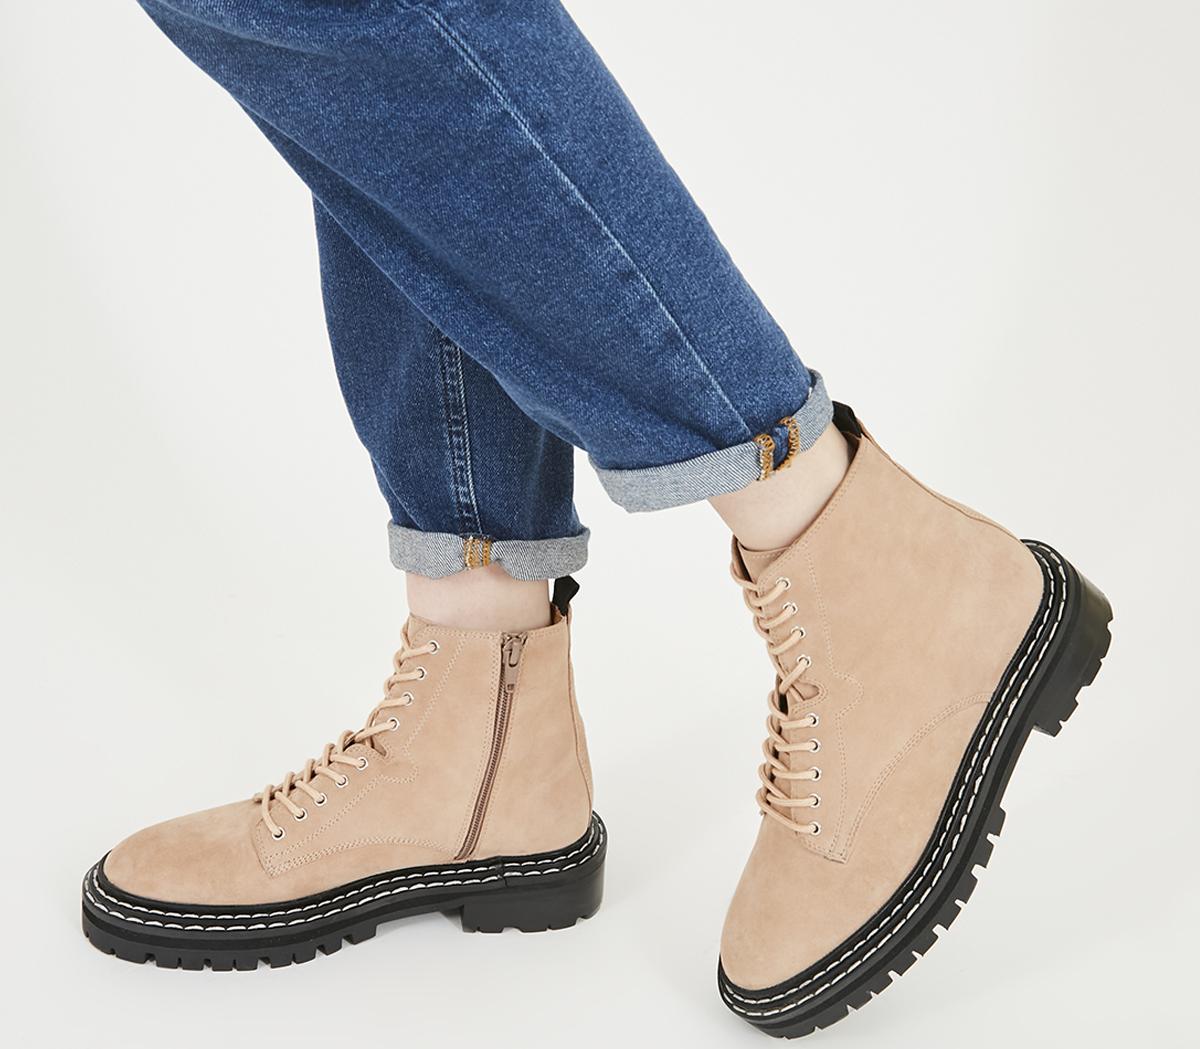 OFFICEAlphabet Double Rand Lace Up BootsBlush Suede